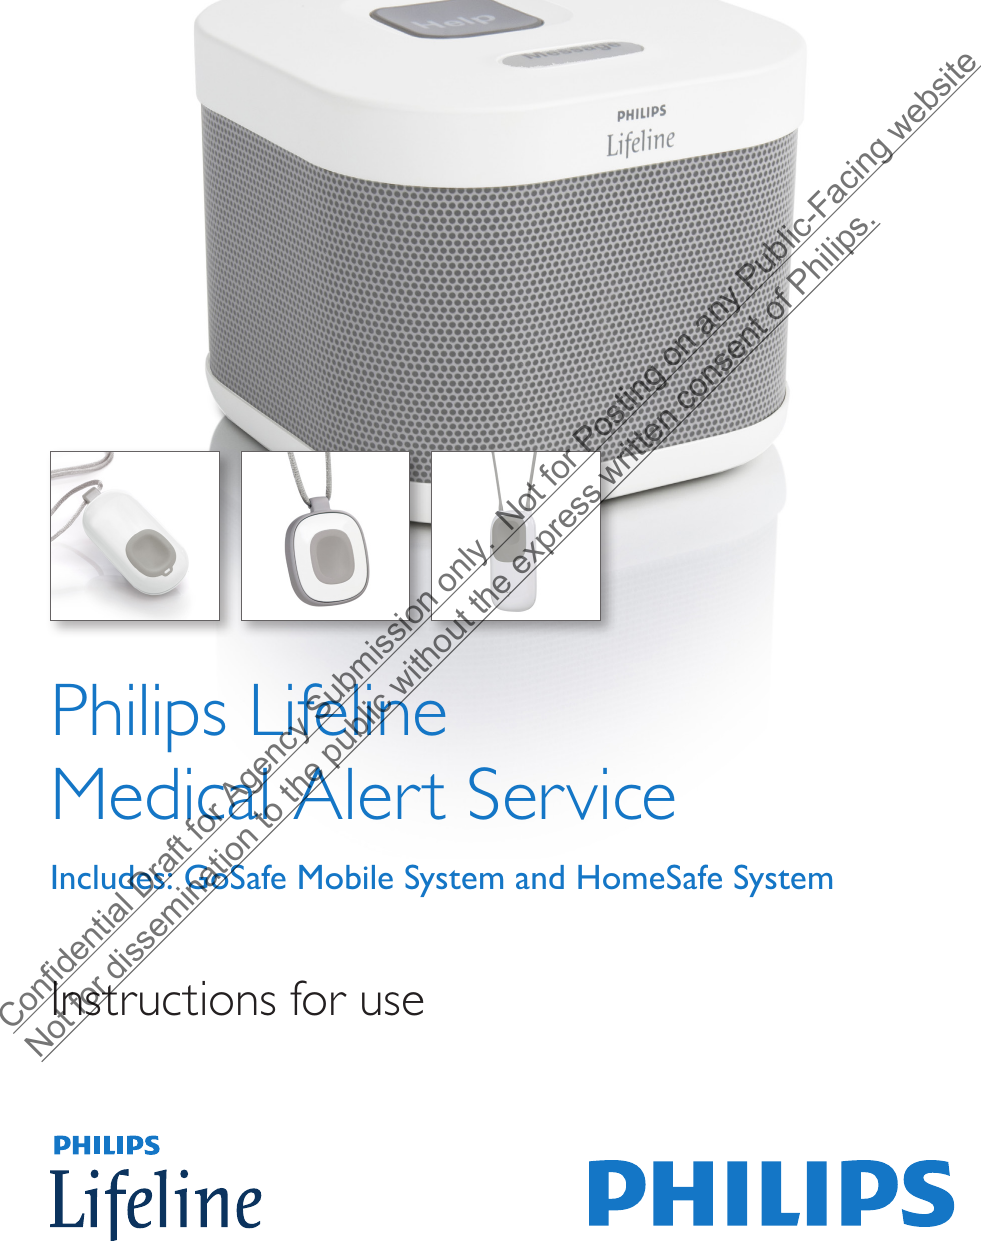 Philips Lifeline  Medical Alert ServiceIncludes: GoSafe Mobile System and HomeSafe SystemInstructions for useConfidential Draft for Agency Submission only.  Not for Posting on any Public-Facing website Not for dissemination to the public without the express written consent of Philips.  